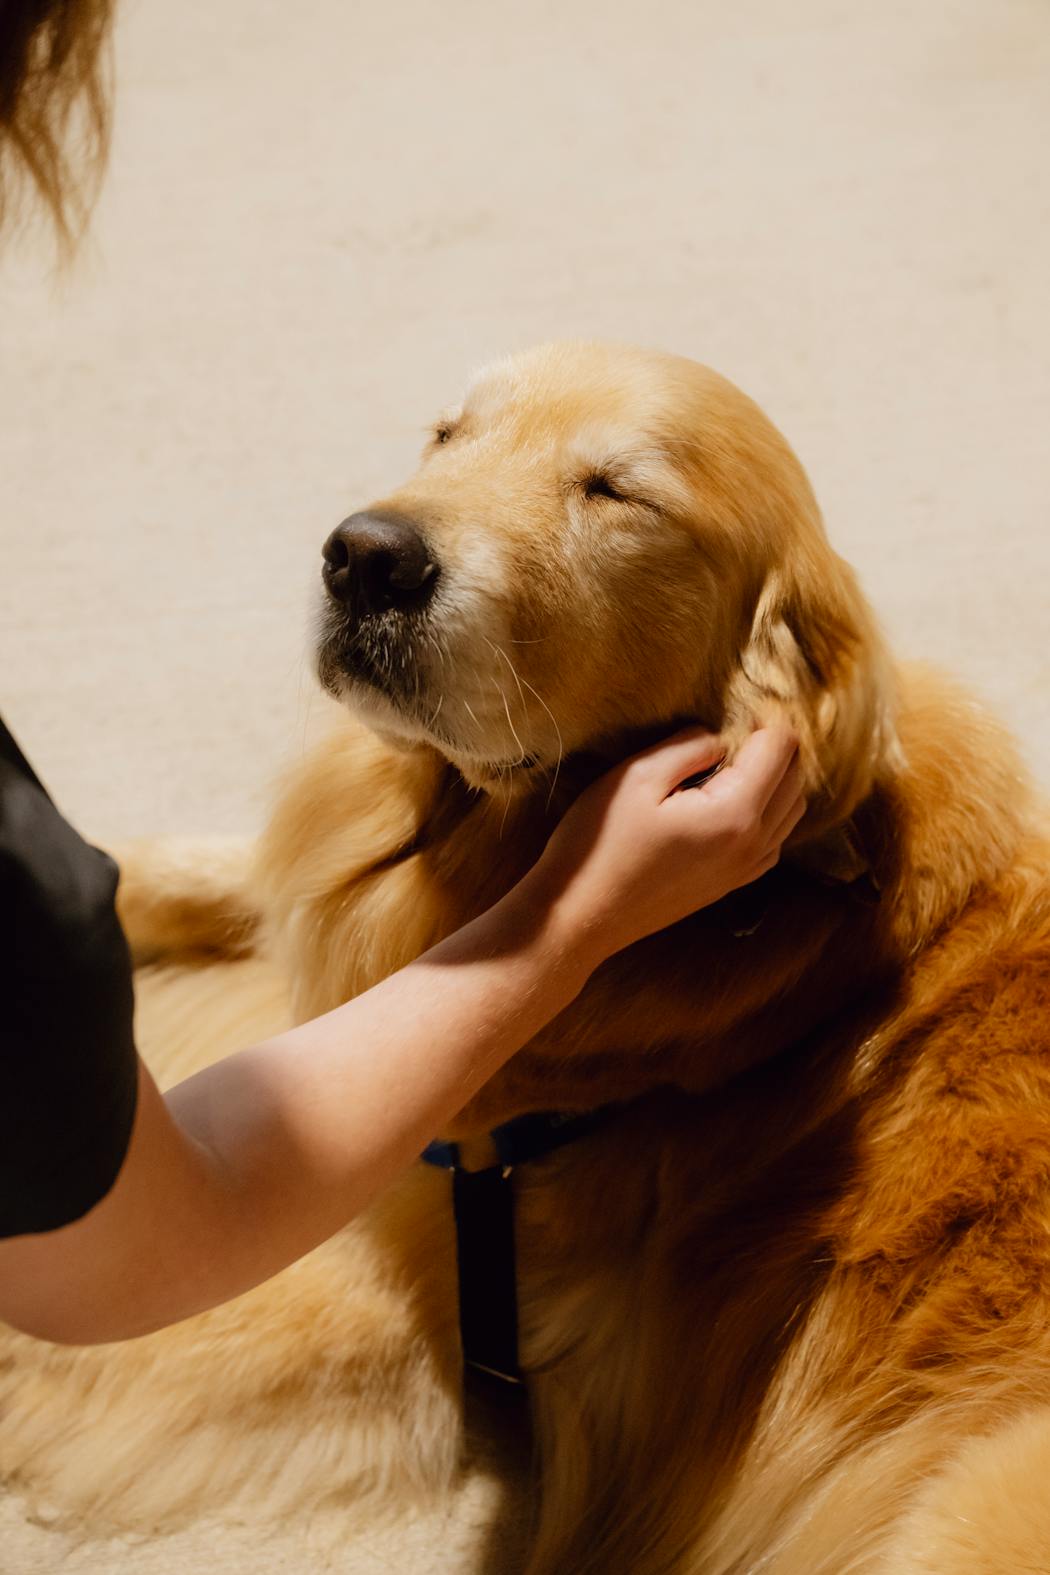 Beacon, a four-year-old golden retriever and therapy dog, at the U.S. gymnastics championships in Forth Worth, Texas, on June 1. Beacon began working with USA Gymnastics last year as part of the organization's efforts to transform the sport's toxic culture. More dogs quickly followed.